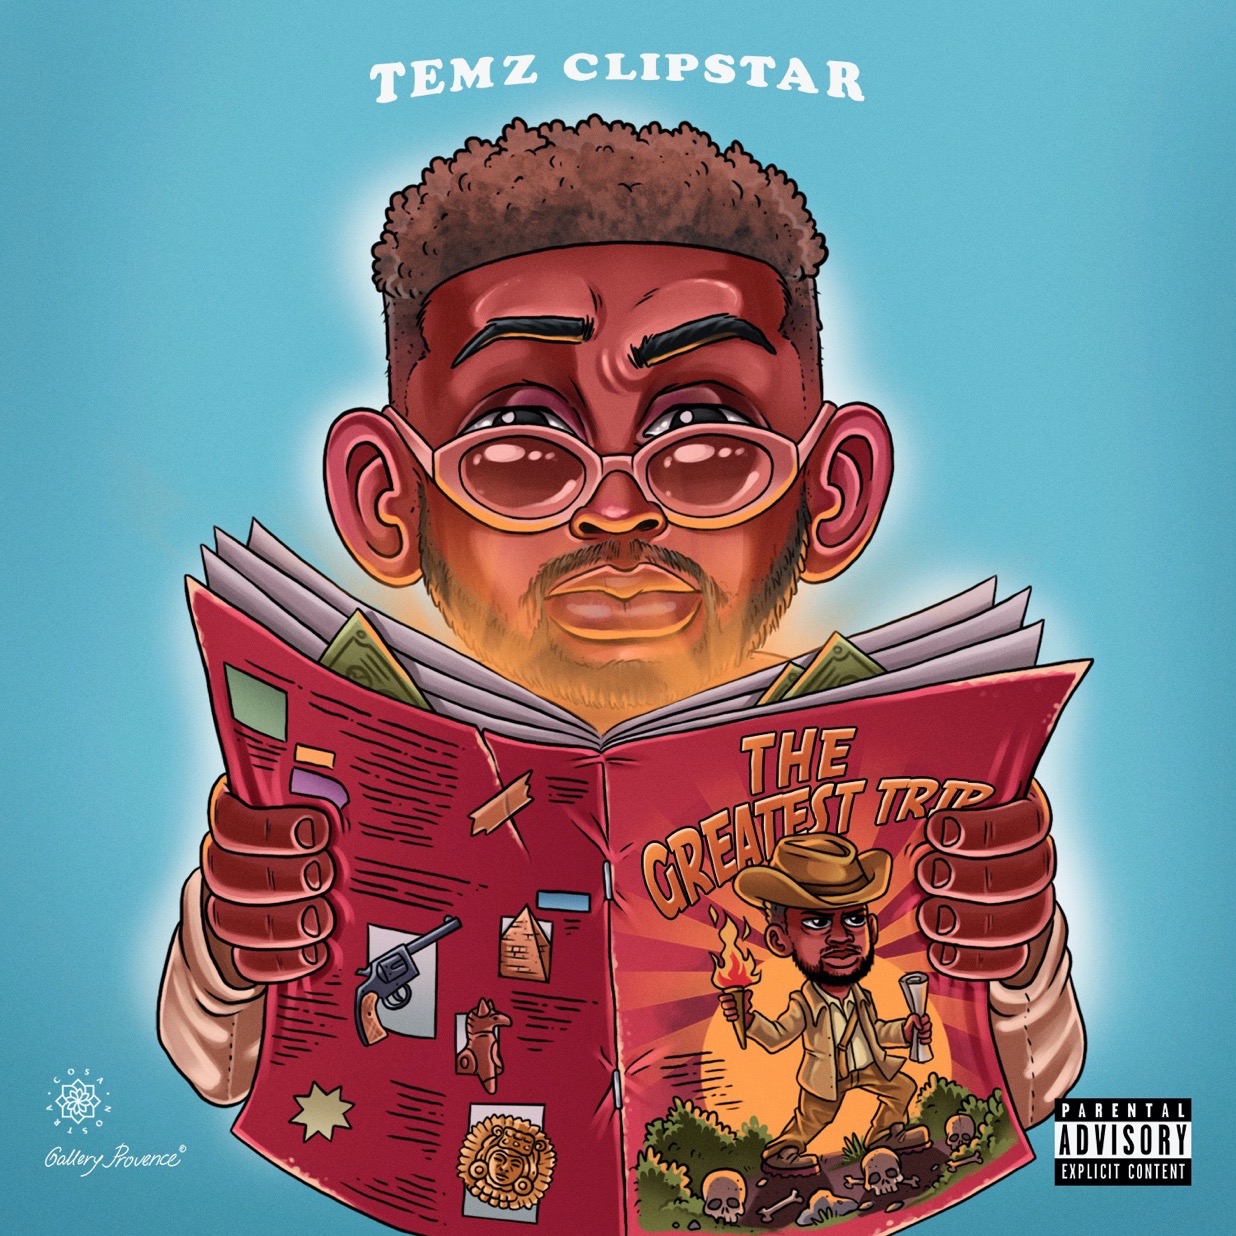 Temz Clipstar [@temzclipstar] talks new project, his journey, and more